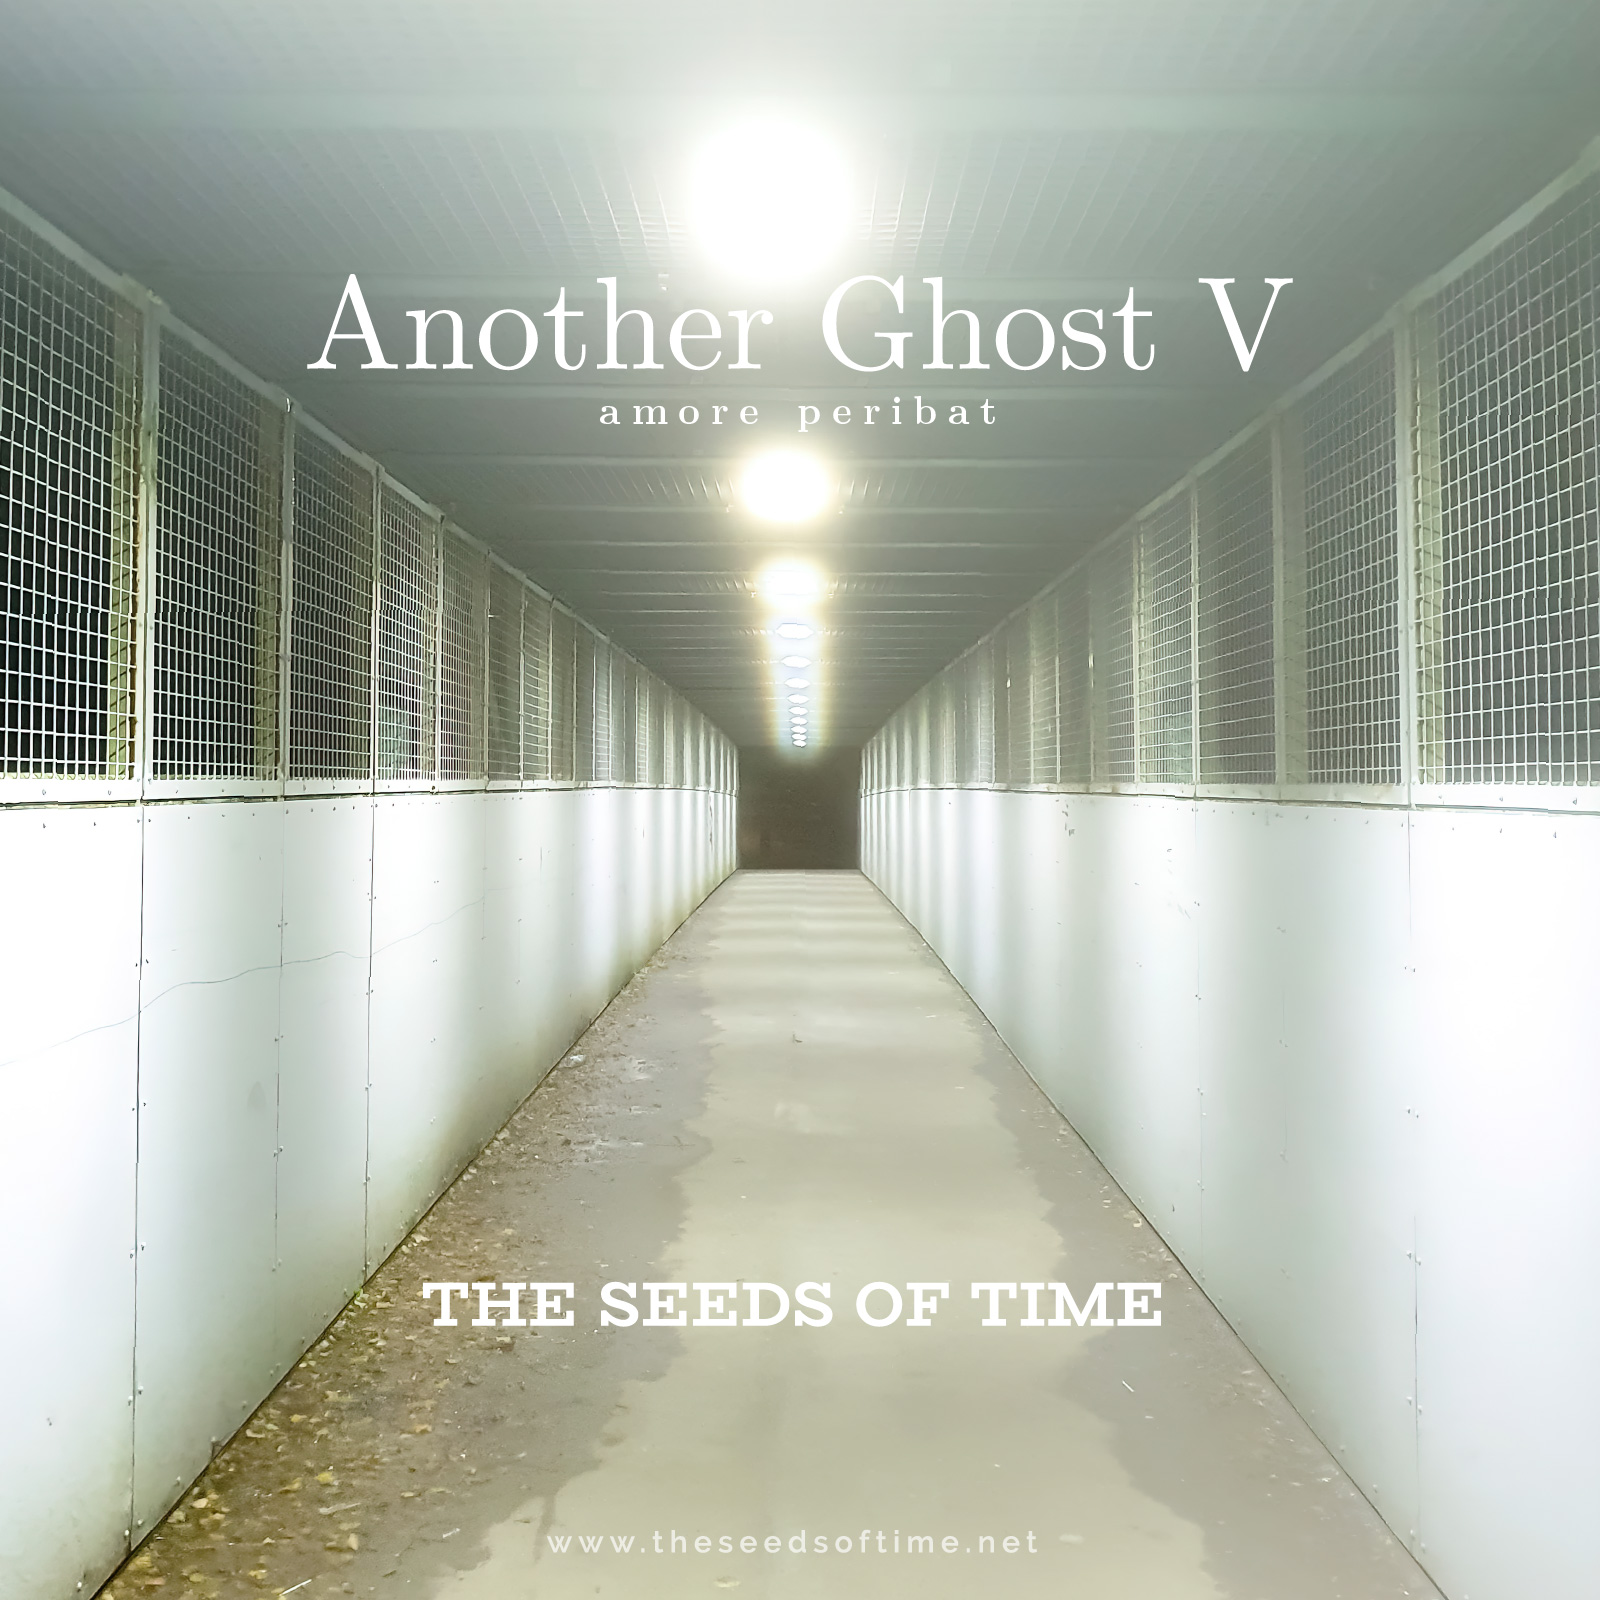 Track image for song titled Another Ghost V showing a brightly lit tunnel ending with an unknown passage